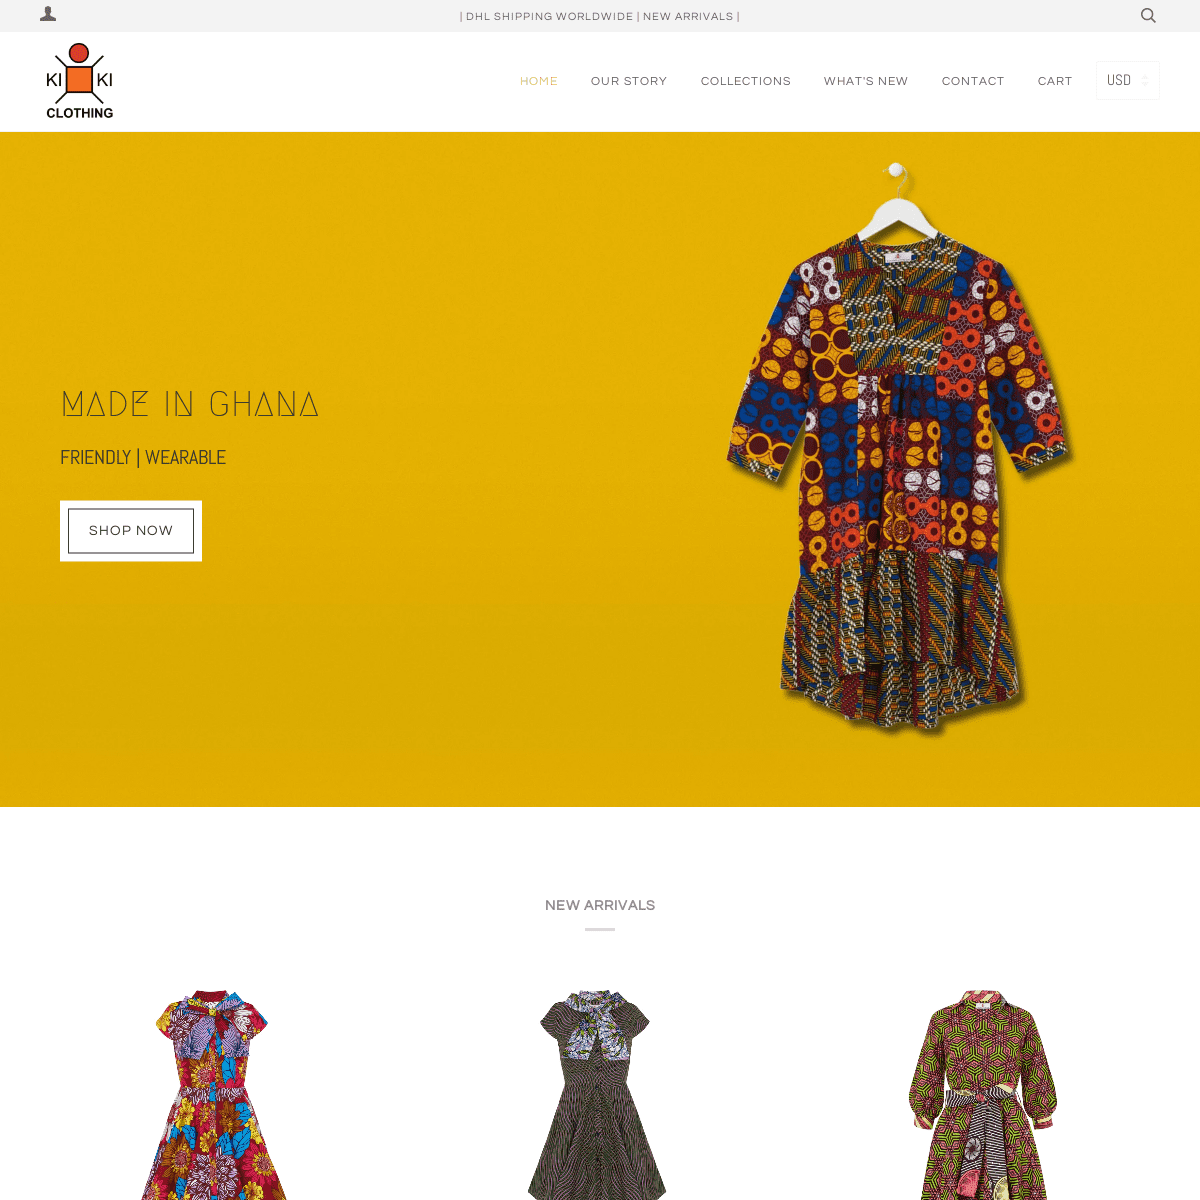 A complete backup of kikiclothing.com